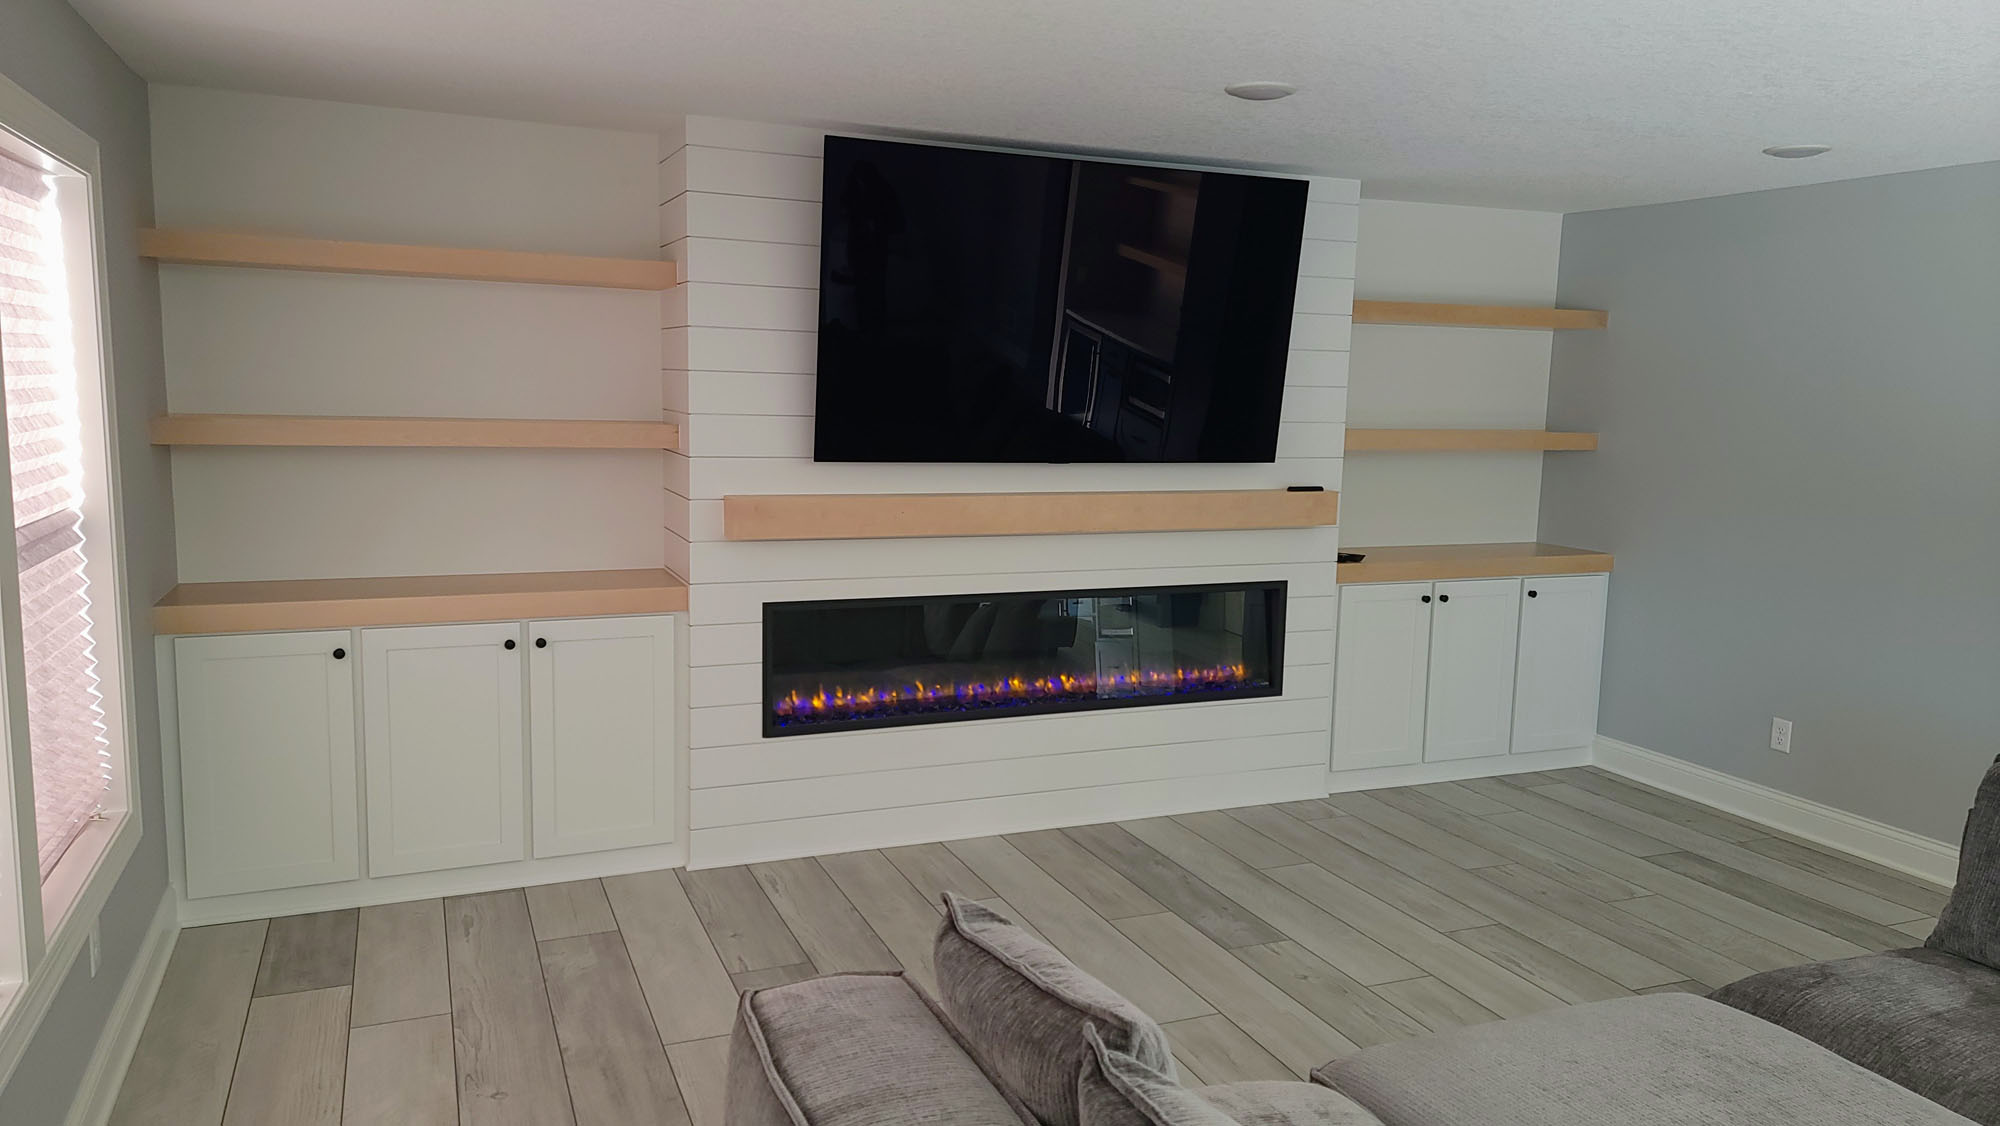 74″ TV w/ Natural Birch wood mantle and floating shelves